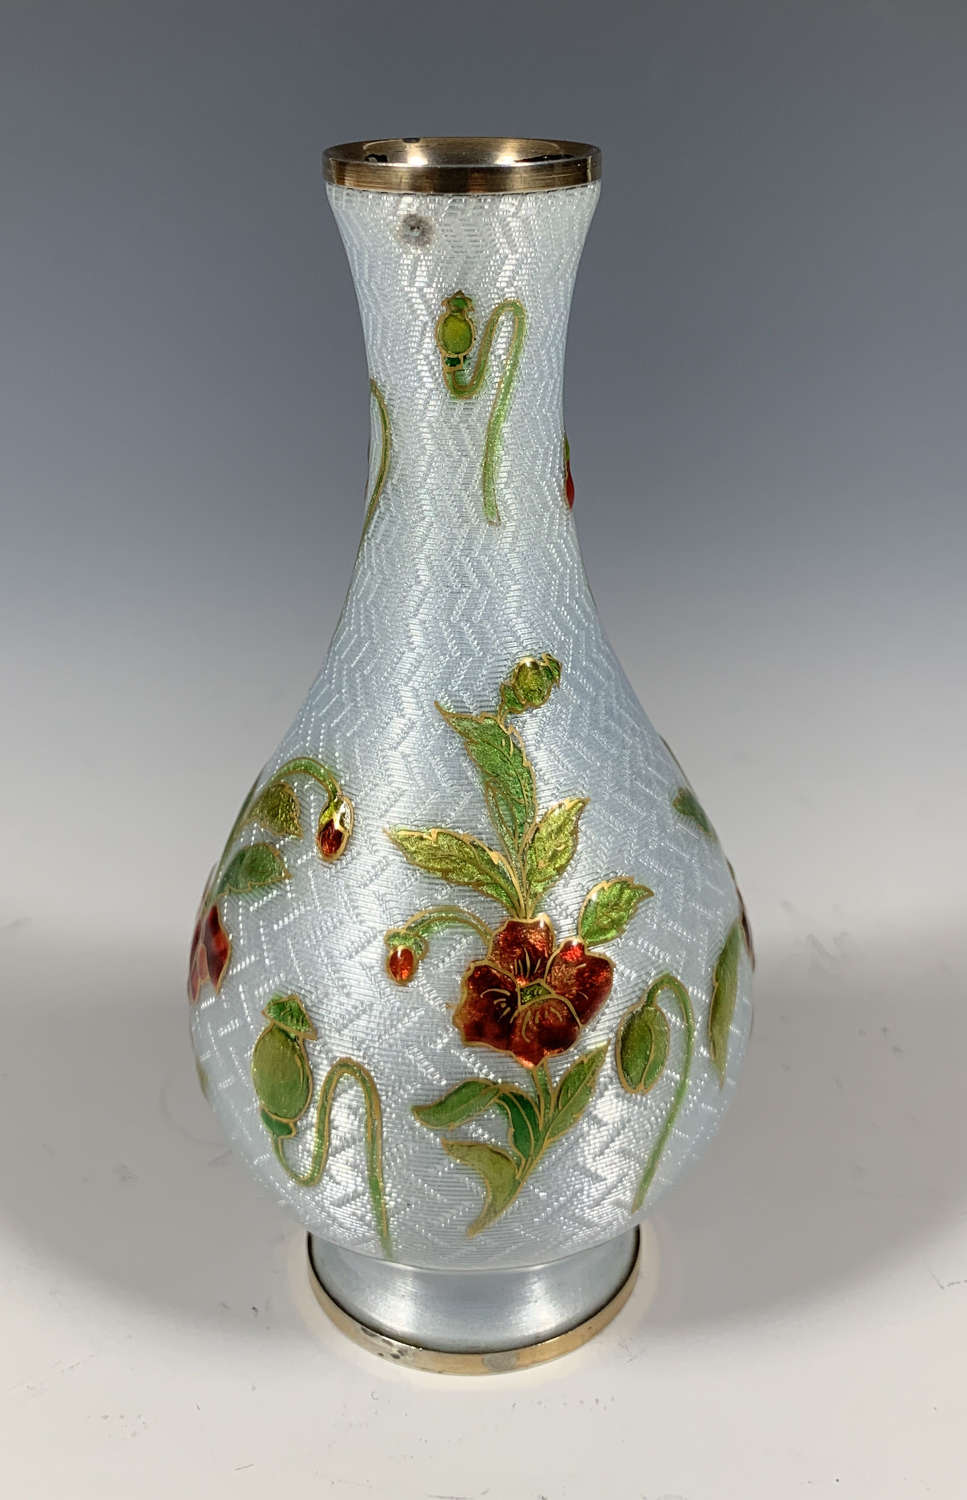 A sterling silver and enamel bud vase, circa 1920